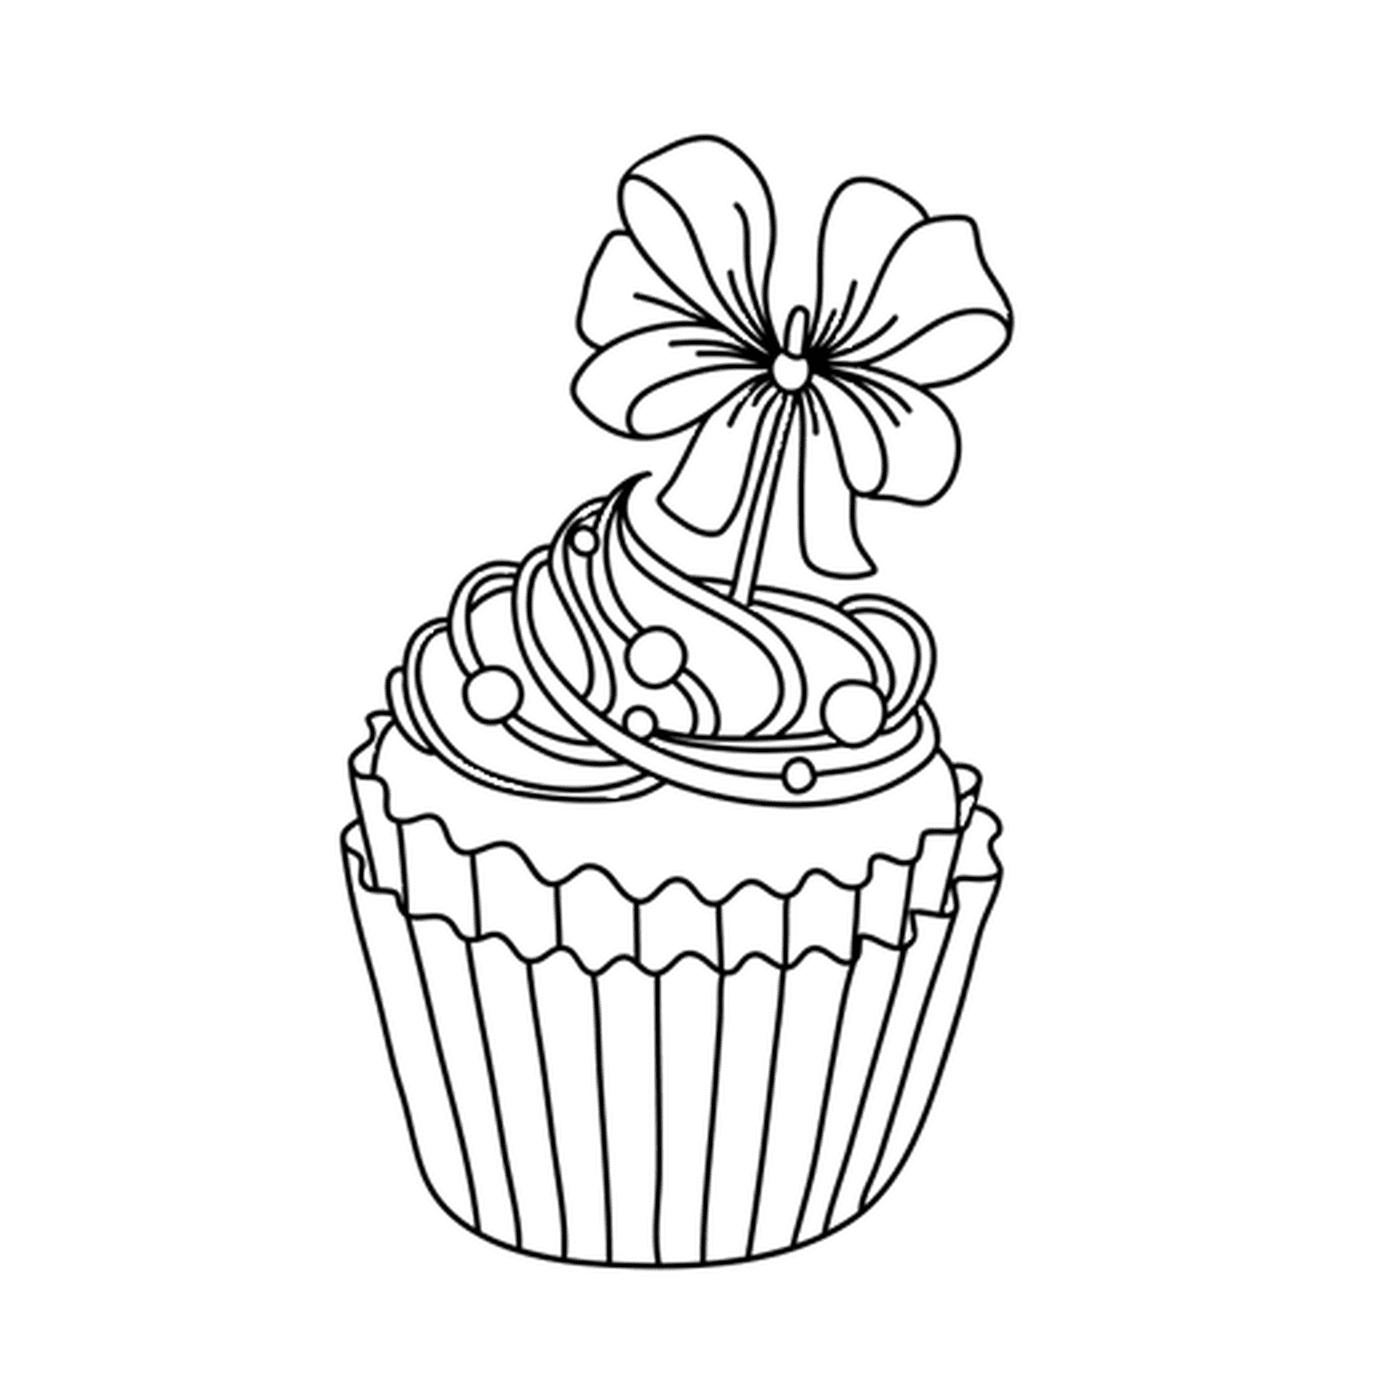  A festive cupcake to eat, with a flower 